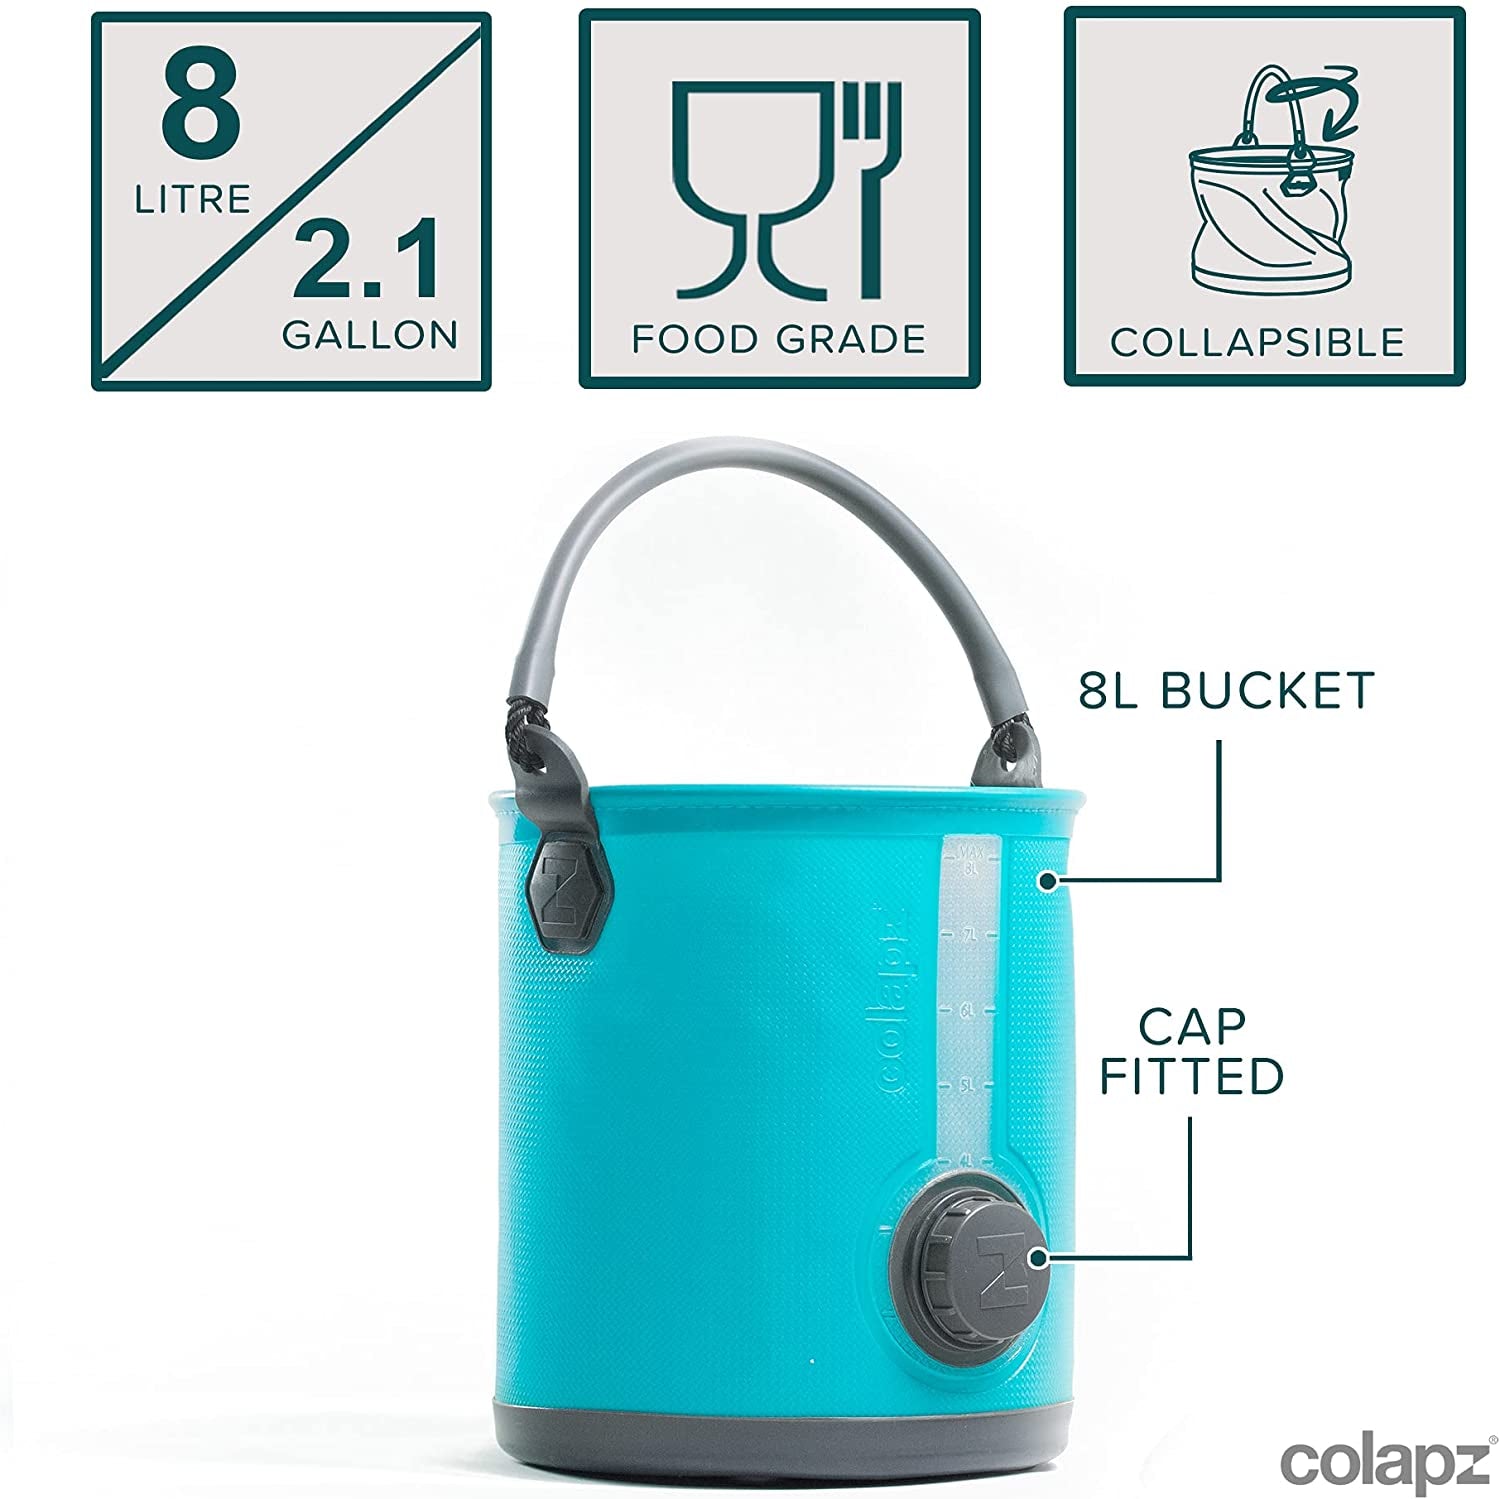 Colapz 2-In-1 Collapsible Camping Water Container with Spigot - 2 Gallon Portable Bucket & Camping Water Jug with Spout - Sports Water Jug - RV Bucket - Water Jug Dispenser - Camping Essentials